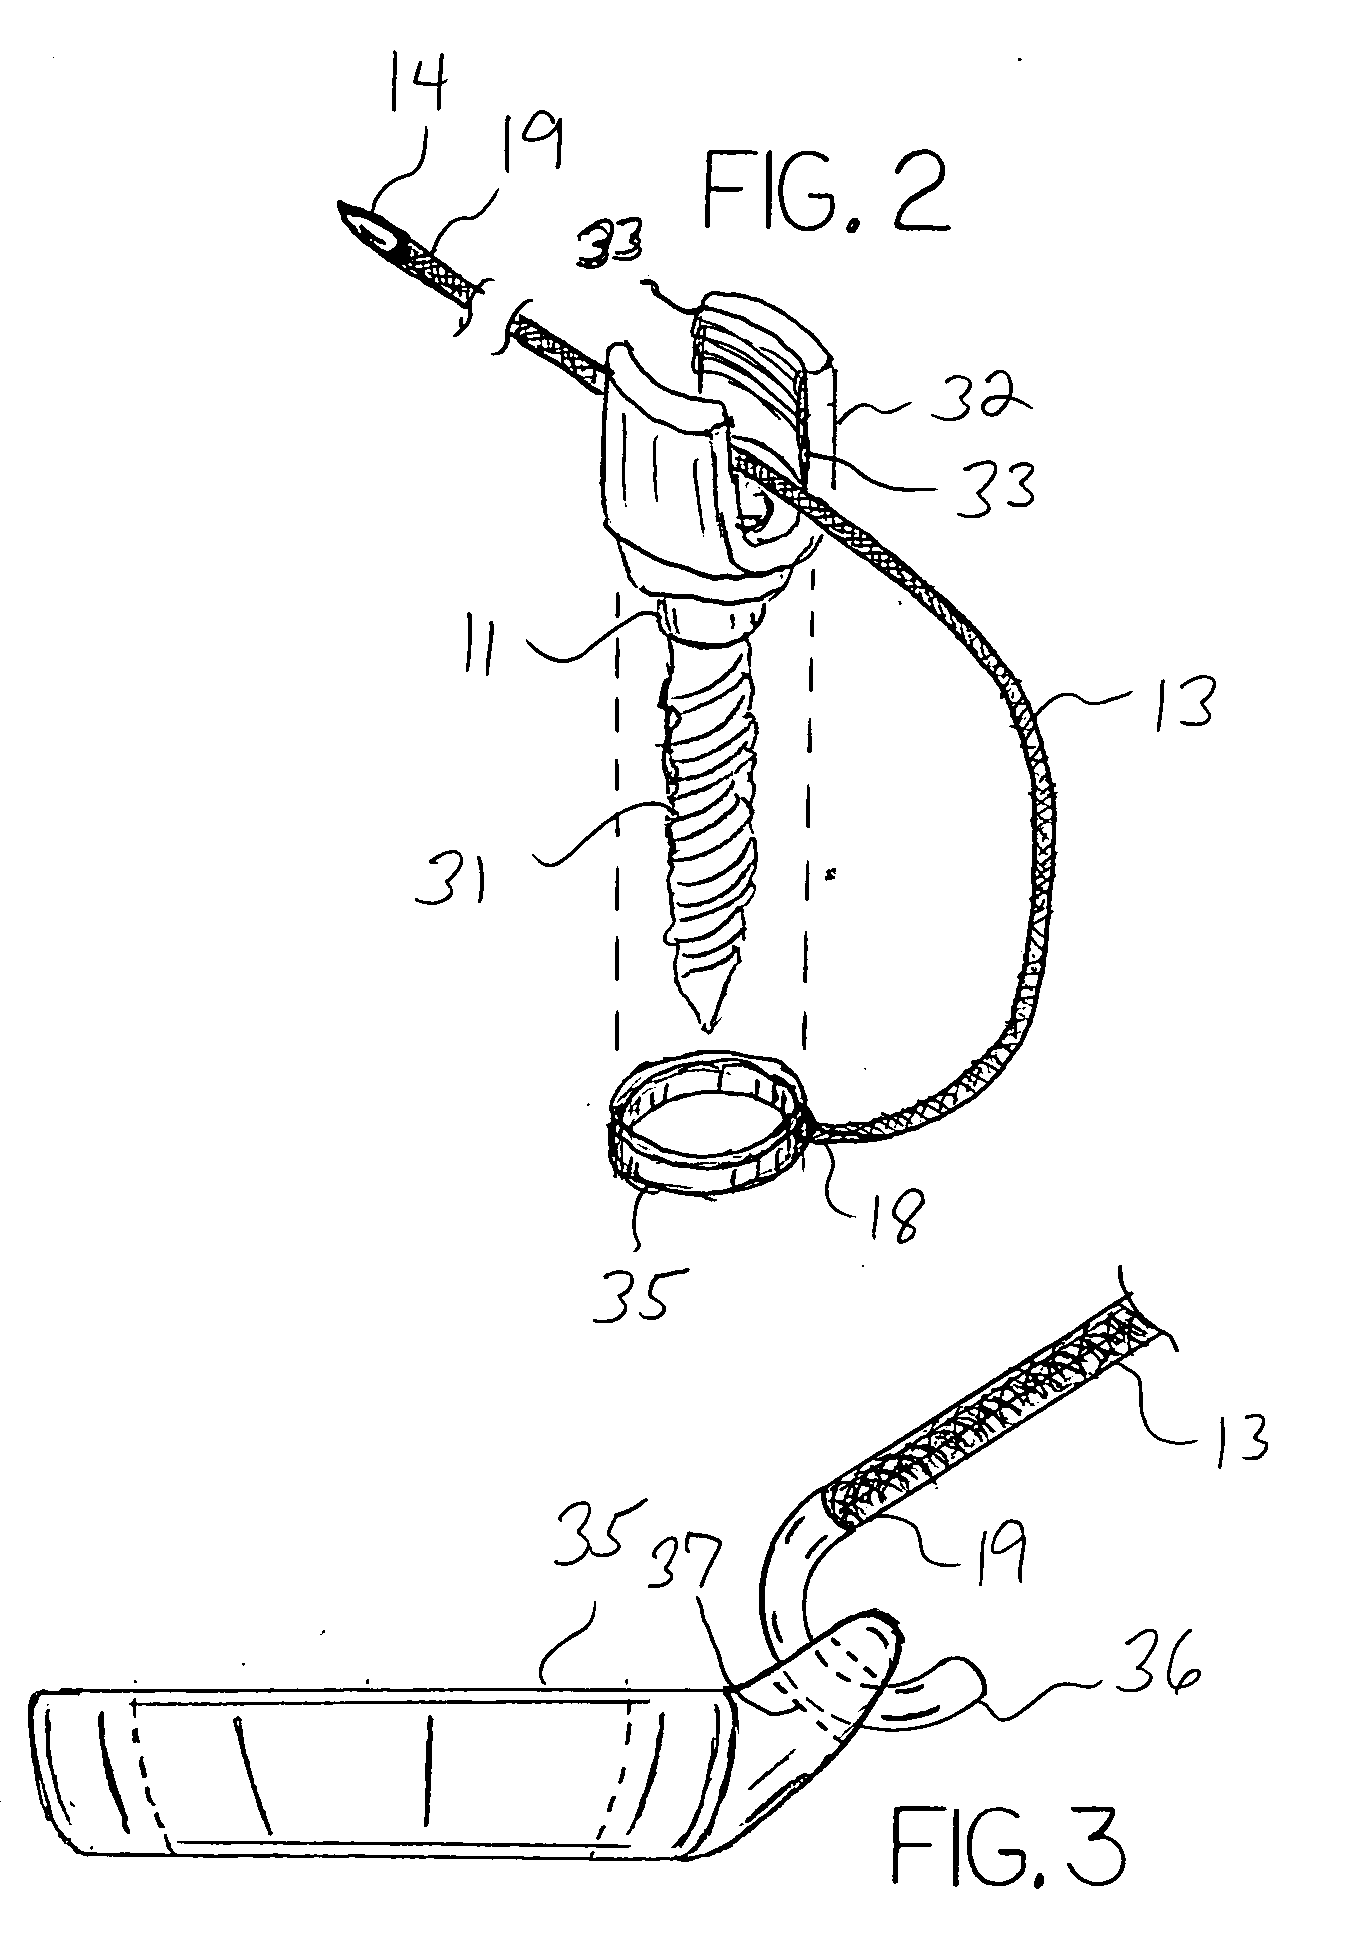 Guide wire mounting collar for spinal fixation using minimally invasive surgical techniques